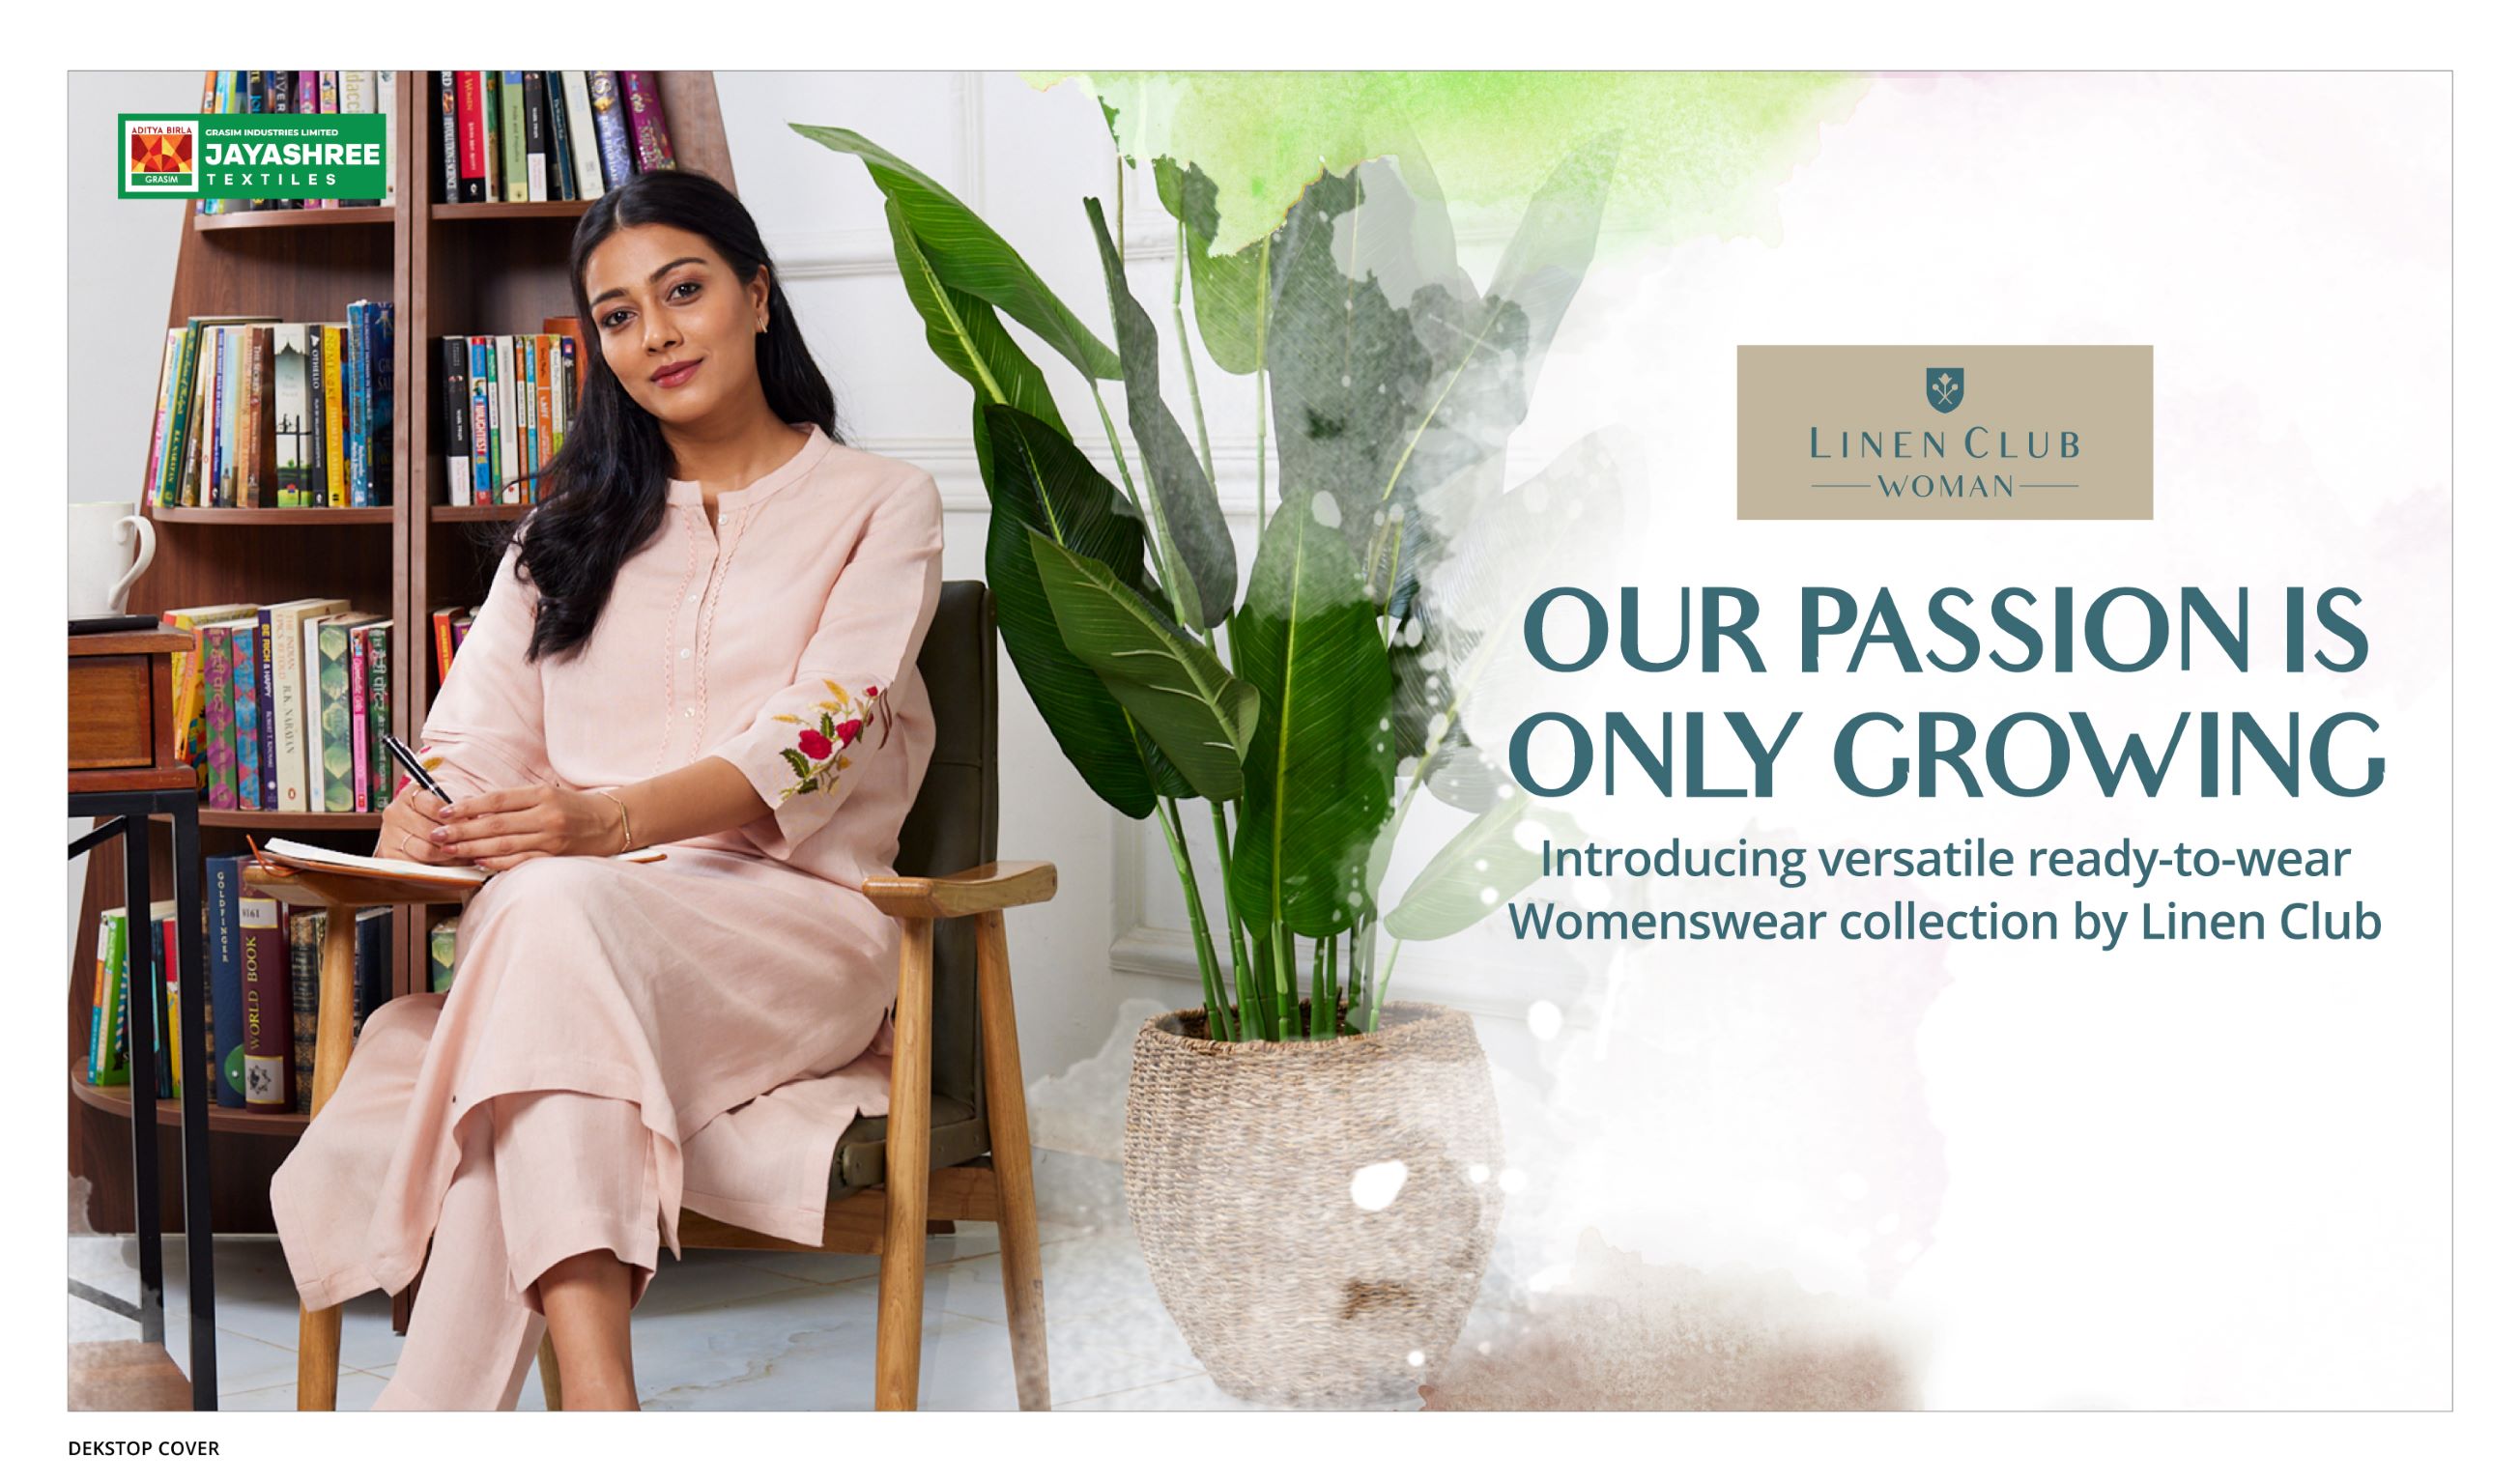 Introducing Linen Club Woman – a versatile ready-to-wear collection that #FeelslikePassion